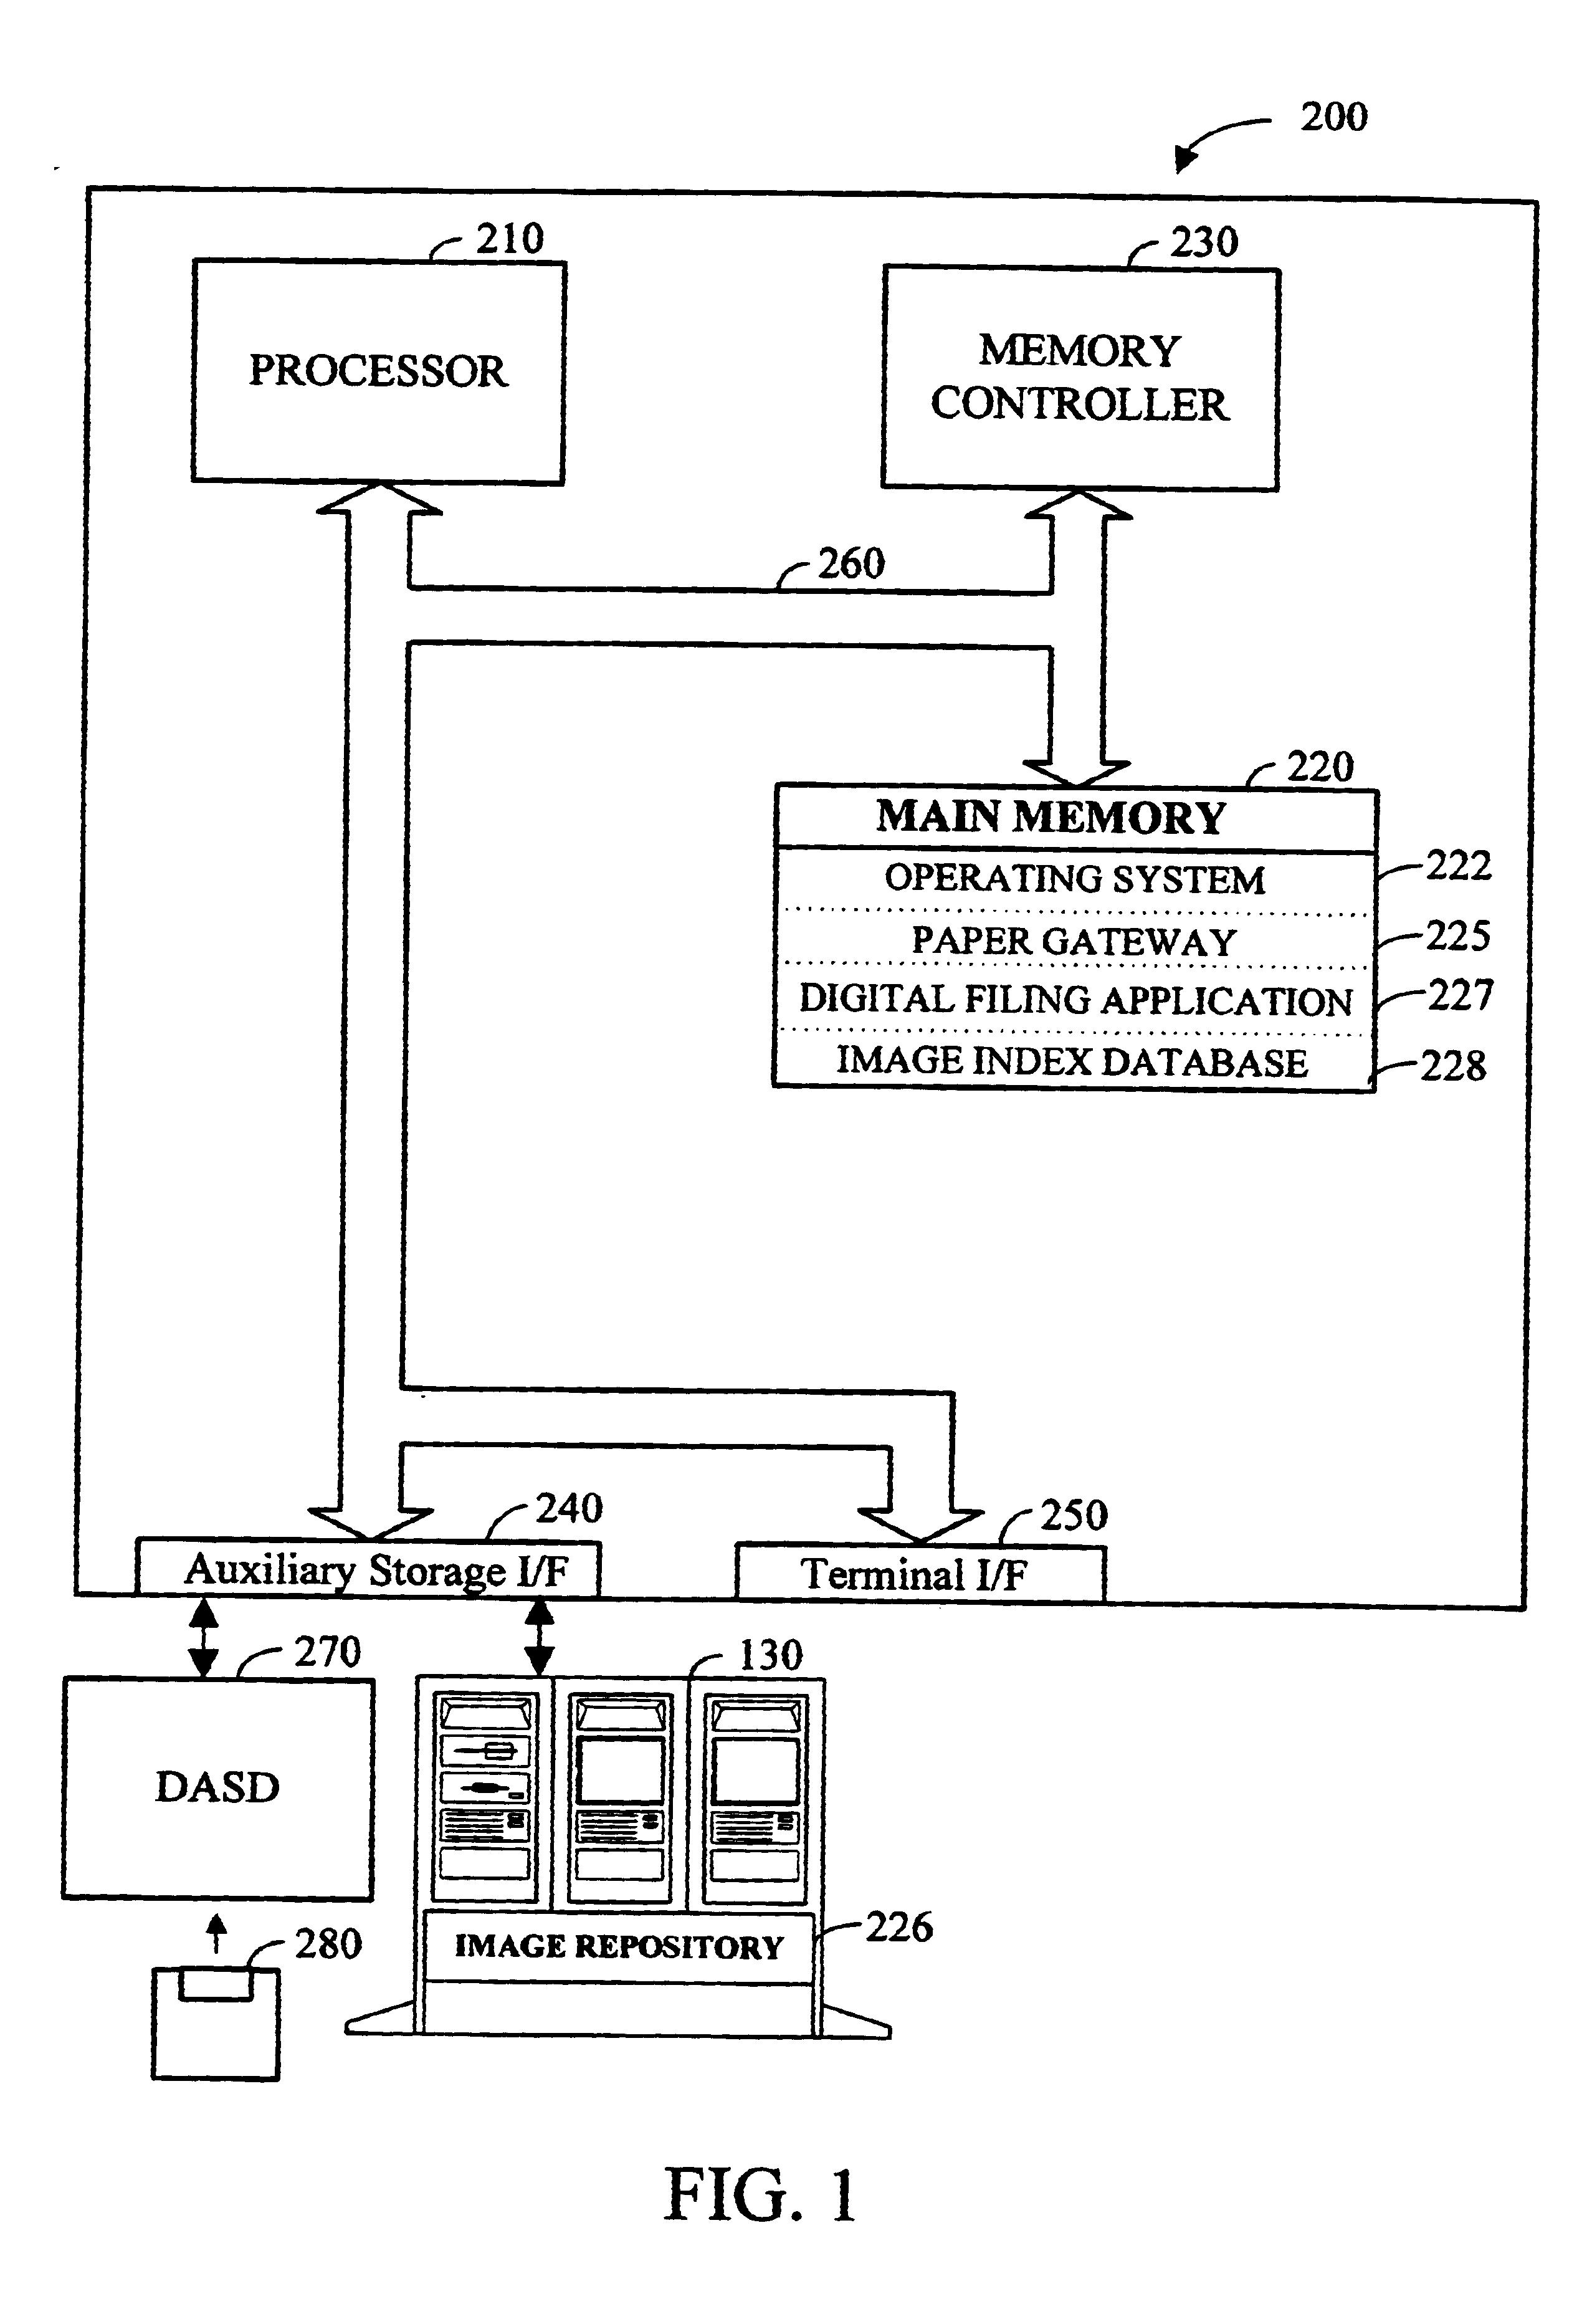 Apparatus and method for dynamically routing documents using dynamic control documents and data streams